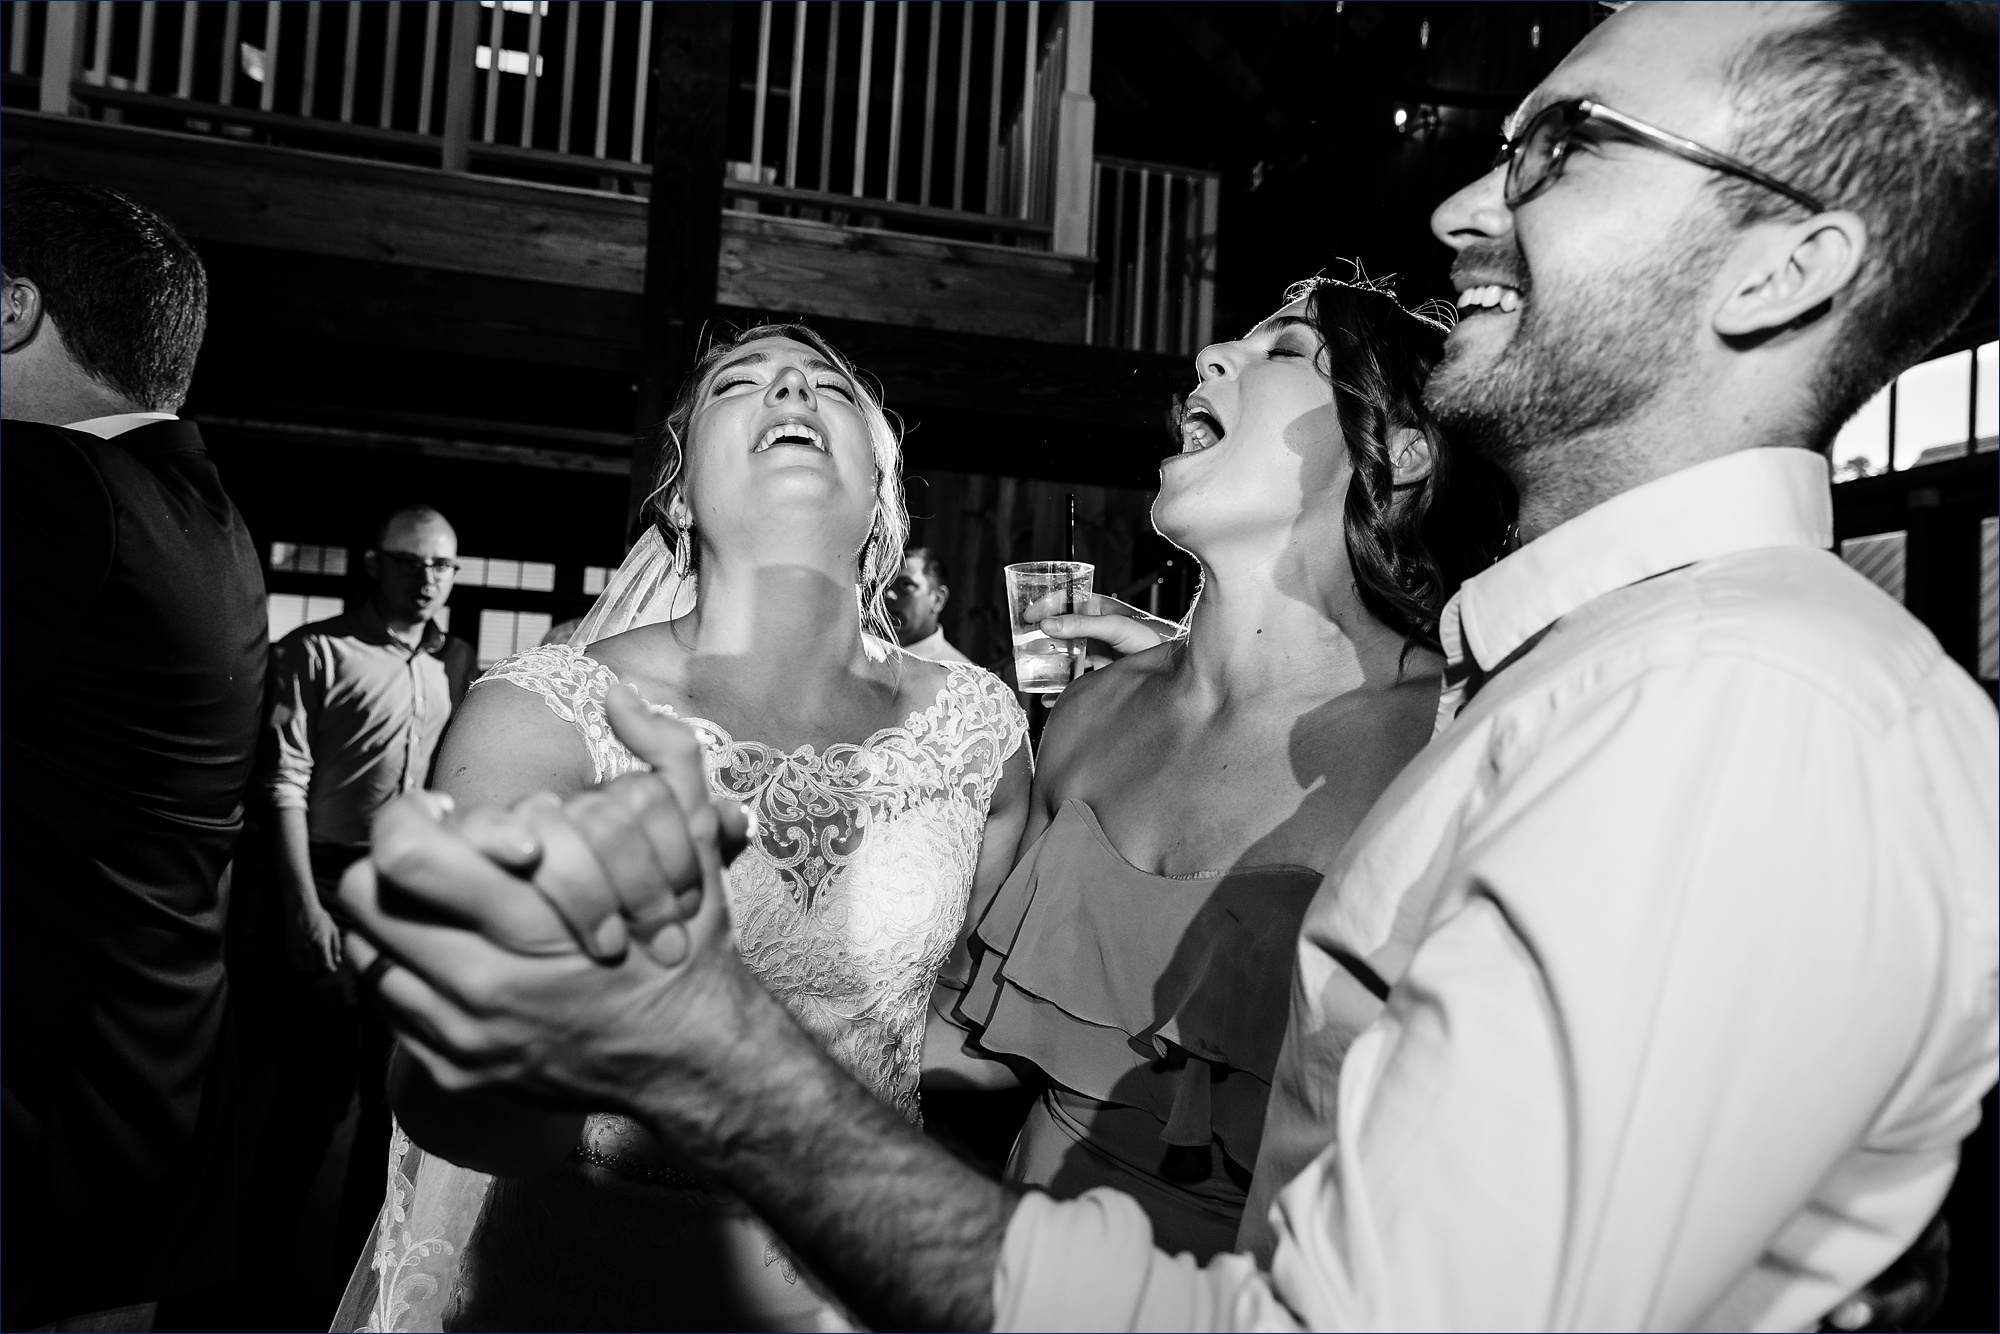 The bride and groom dance with guests inside the barn at The Preserve at Chocorua NH wedding